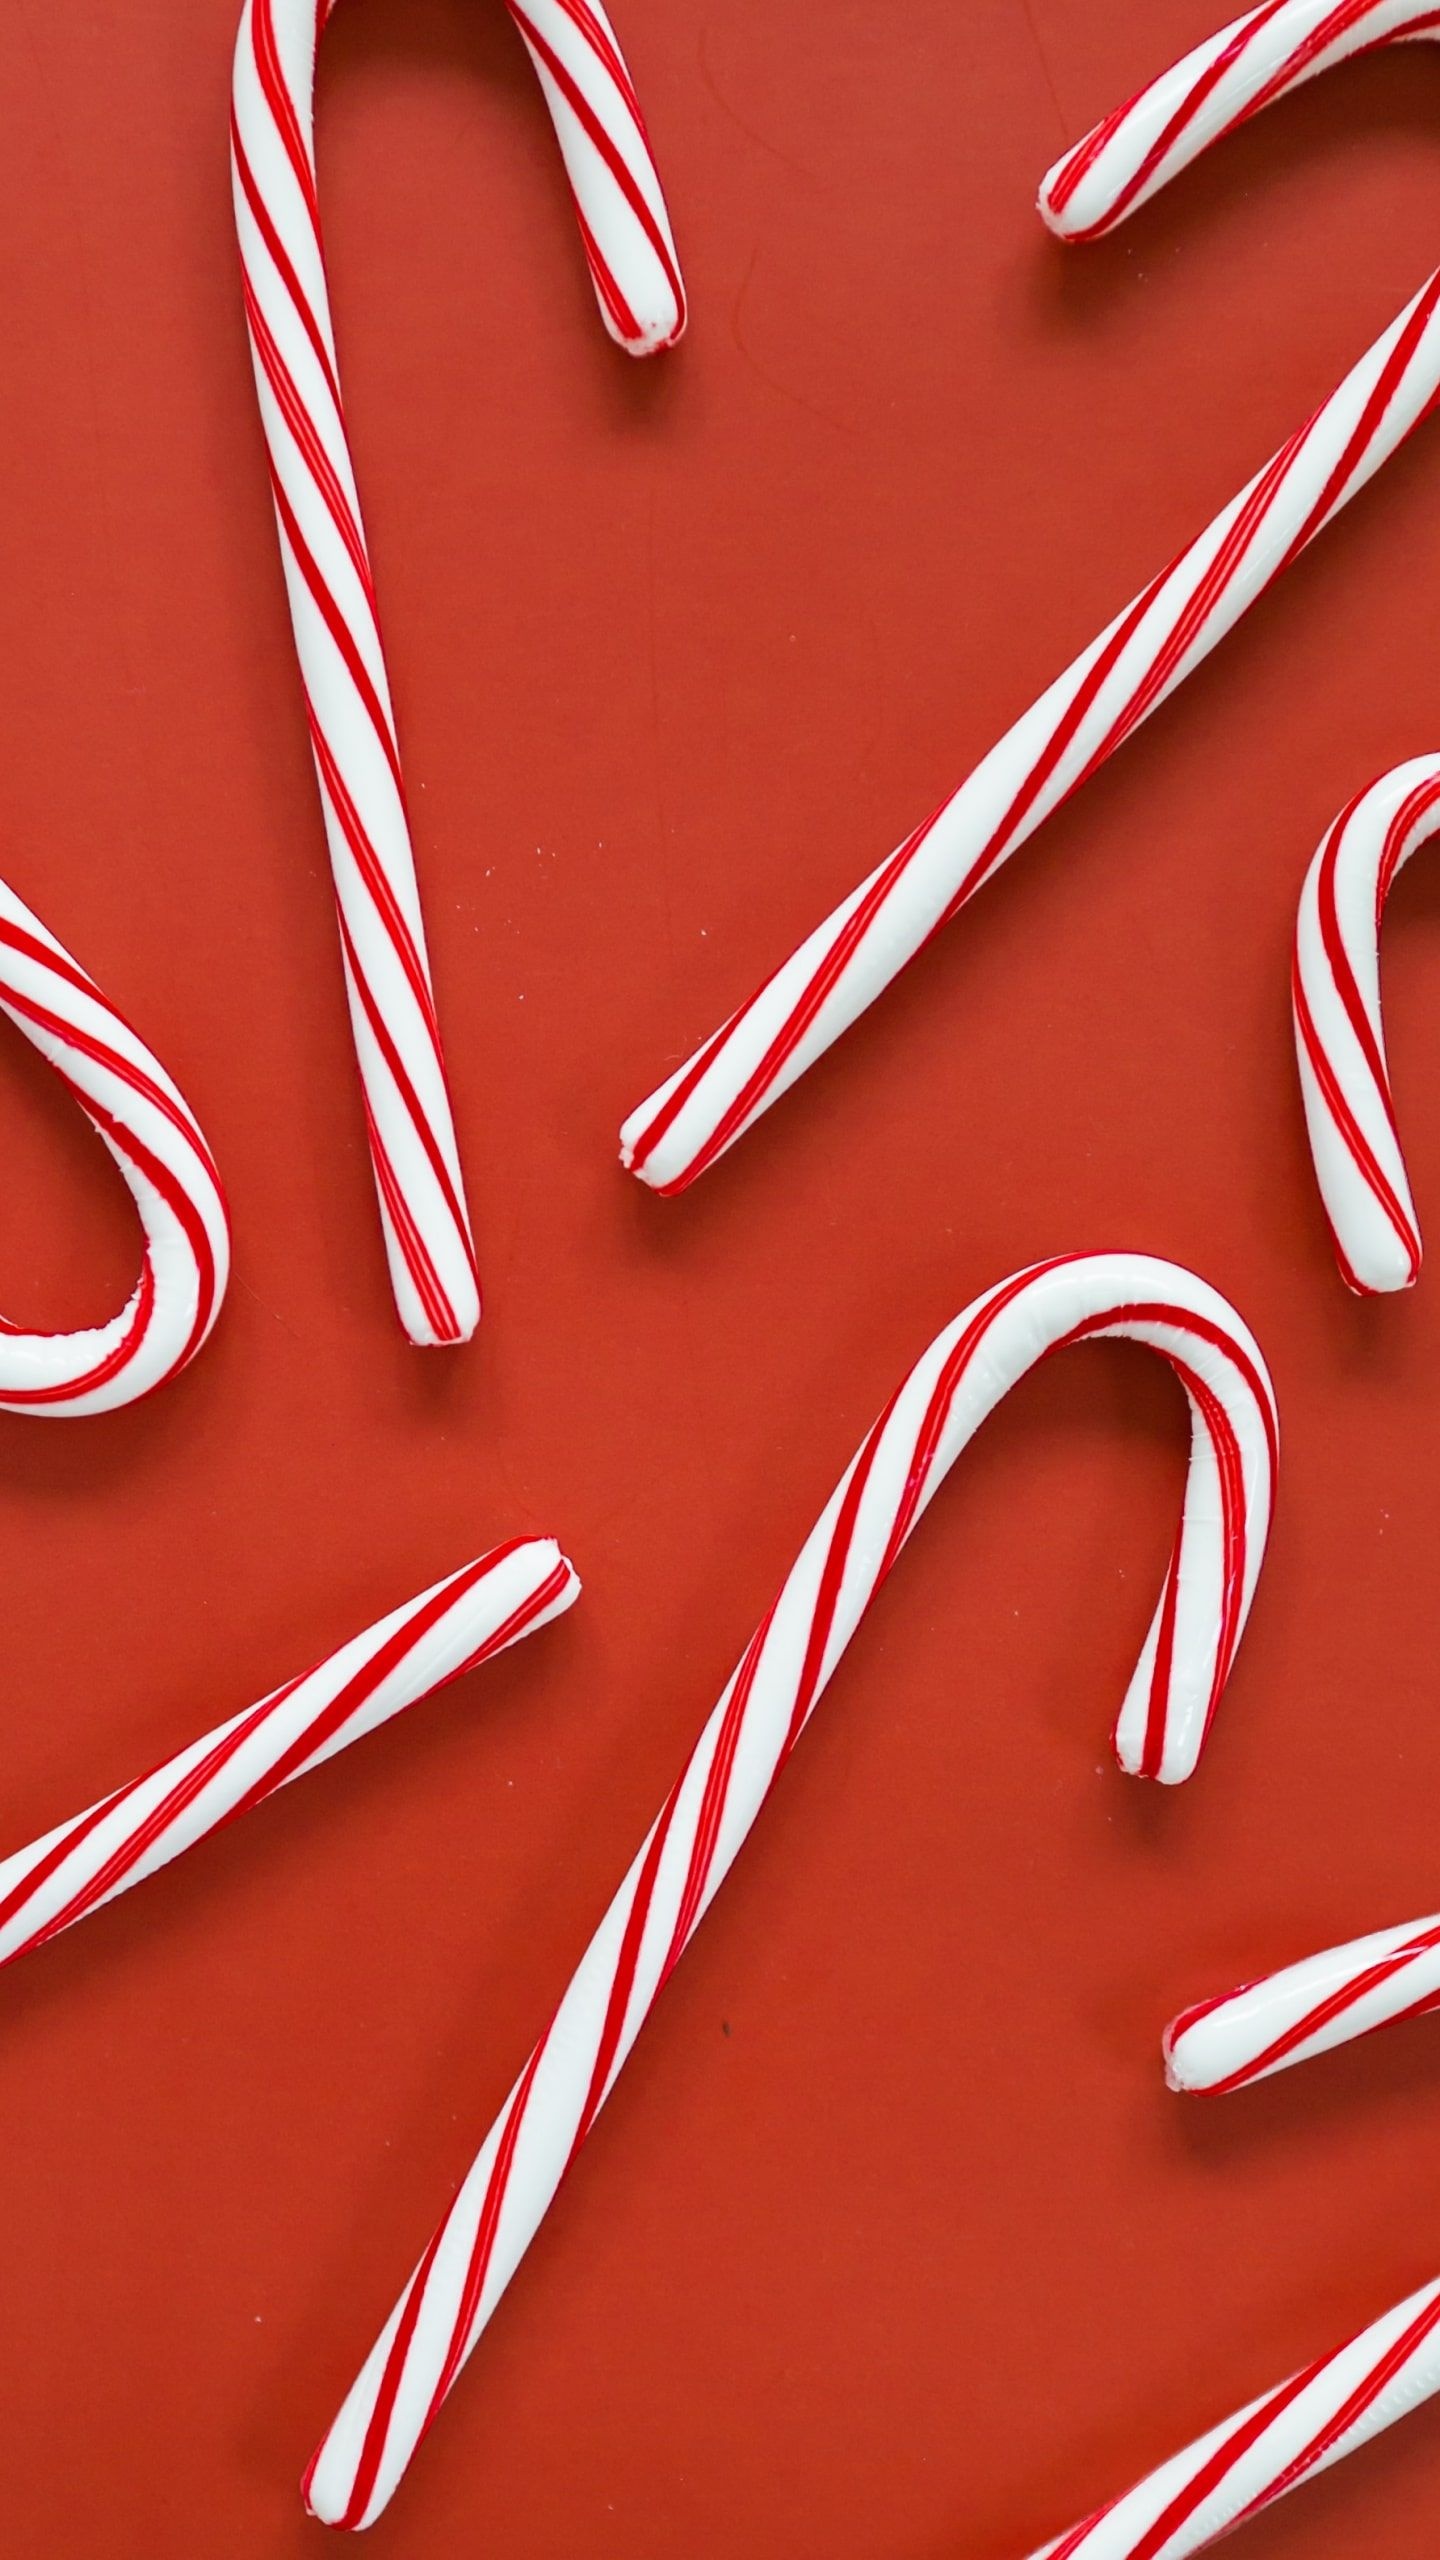 Colorful candy canes, Sweet holiday delights, Festive iPhone wallpapers, Peppermint joy, 1440x2560 HD Handy